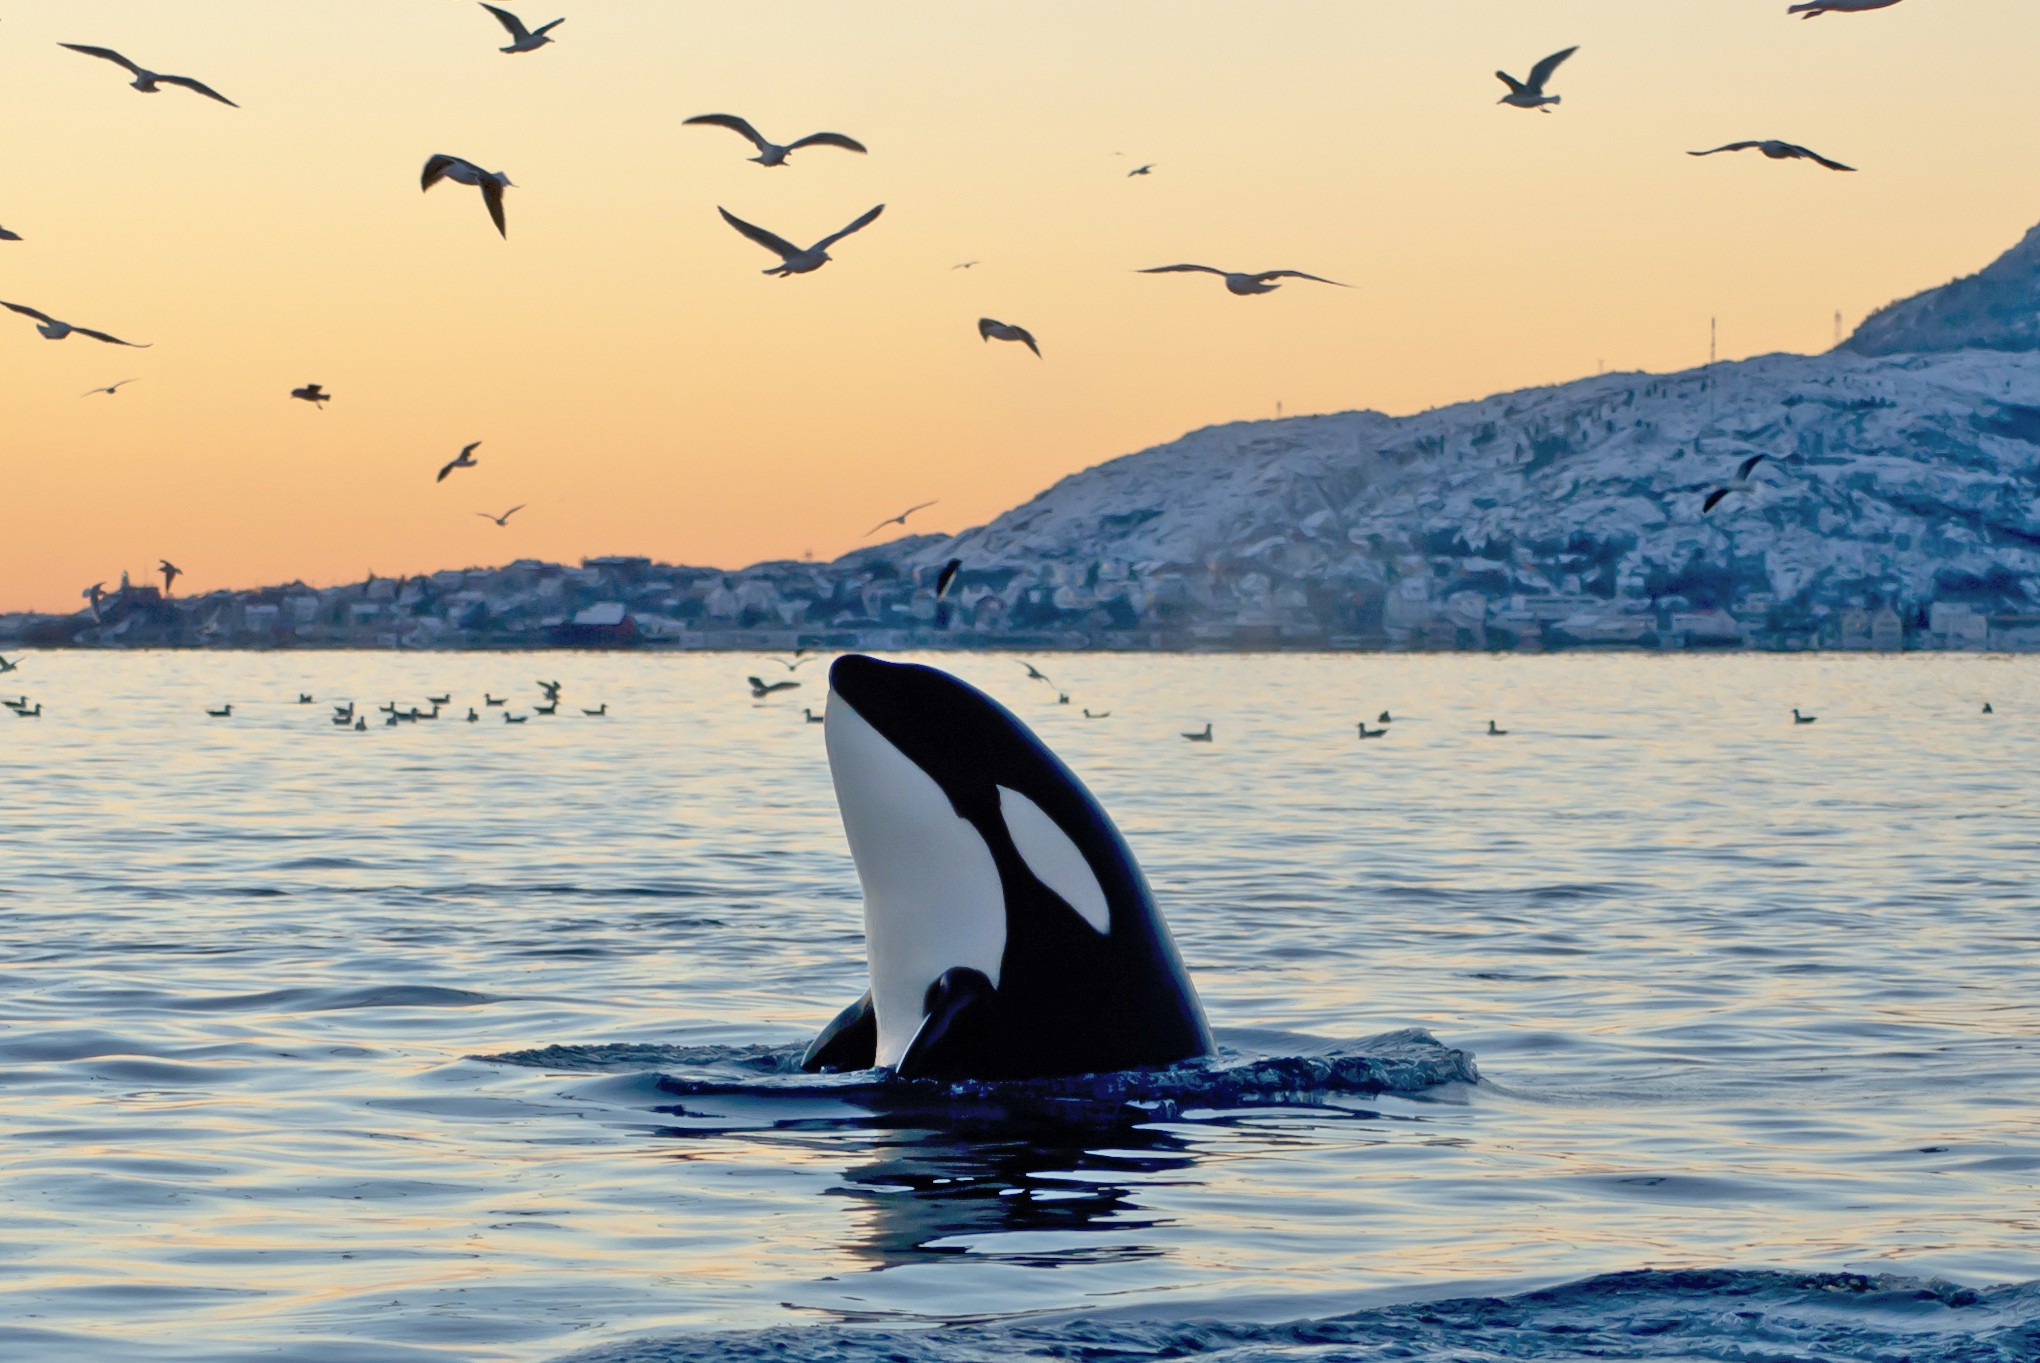 The six-tonne orca is not a whale, despite its ‘killer whale’ name, but rather, the largest kind of dolphins. Photo: Thinkstock